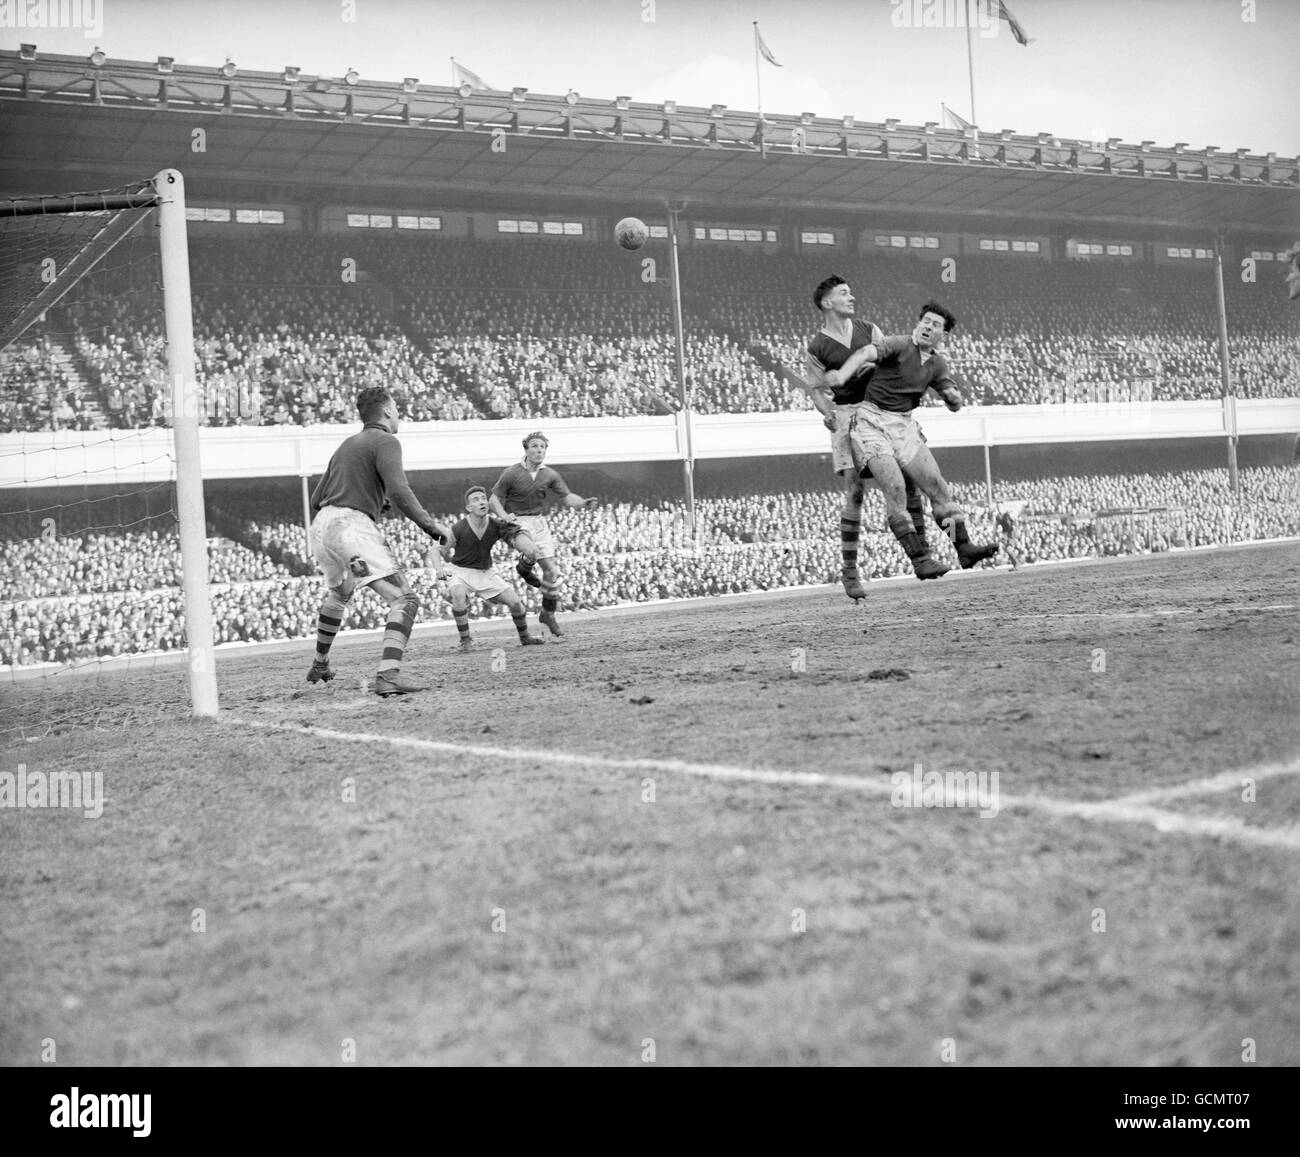 In the Burnley goal area, McNichol (Chelsea) and Adamson the Burnley center half, both go for the ball in the air, watched by McDonald the Burnley goalkeeper. Stock Photo